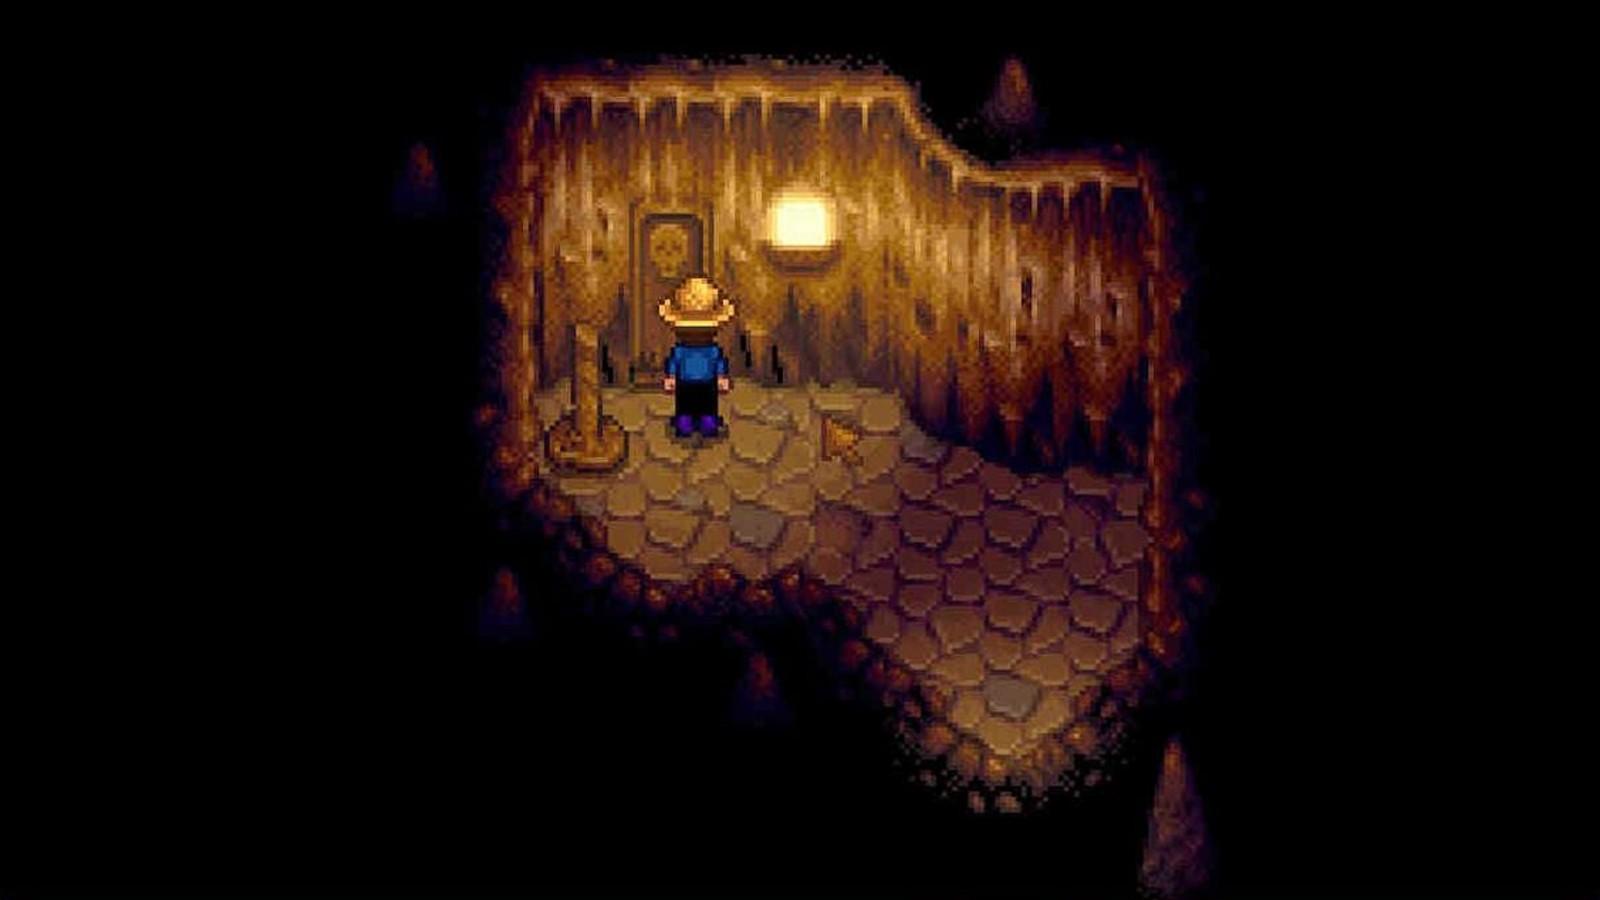 An image of the Skull Cavern entrance in Stardew Valley where you can find Purple Mushrooms.